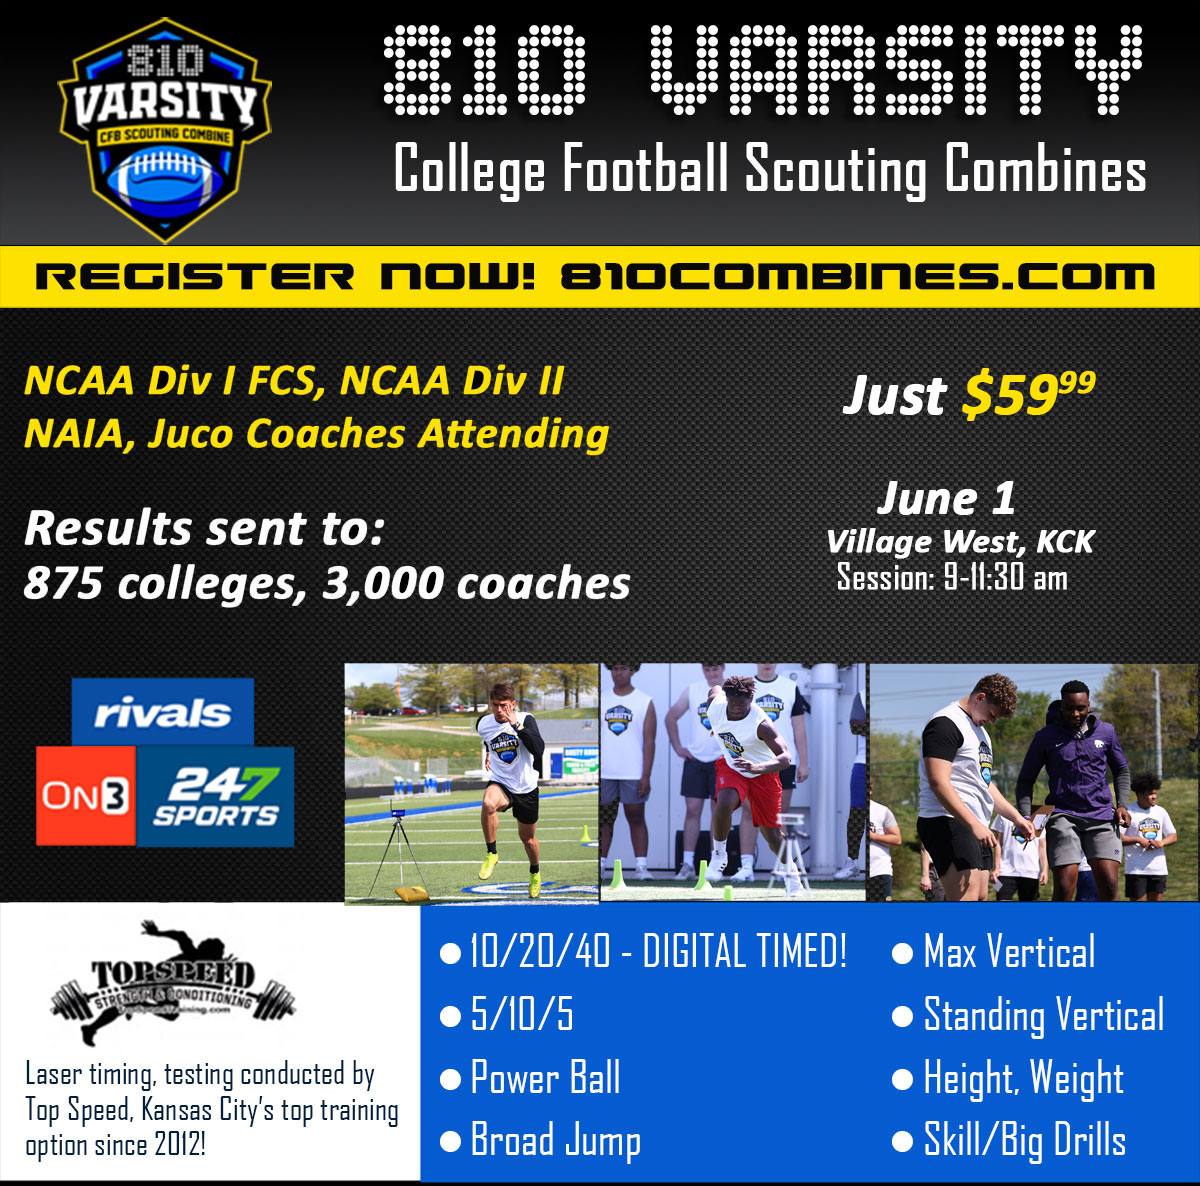 810 Varsity College Football Scouting Combines 📅June 1 👓College coaches: NCAA Div I (FCS), NCAA Div II, NAIA, Juco 💸Just $59.99 🖊️Register now! bit.ly/3PlYt74 🔢More details: 810combines.com